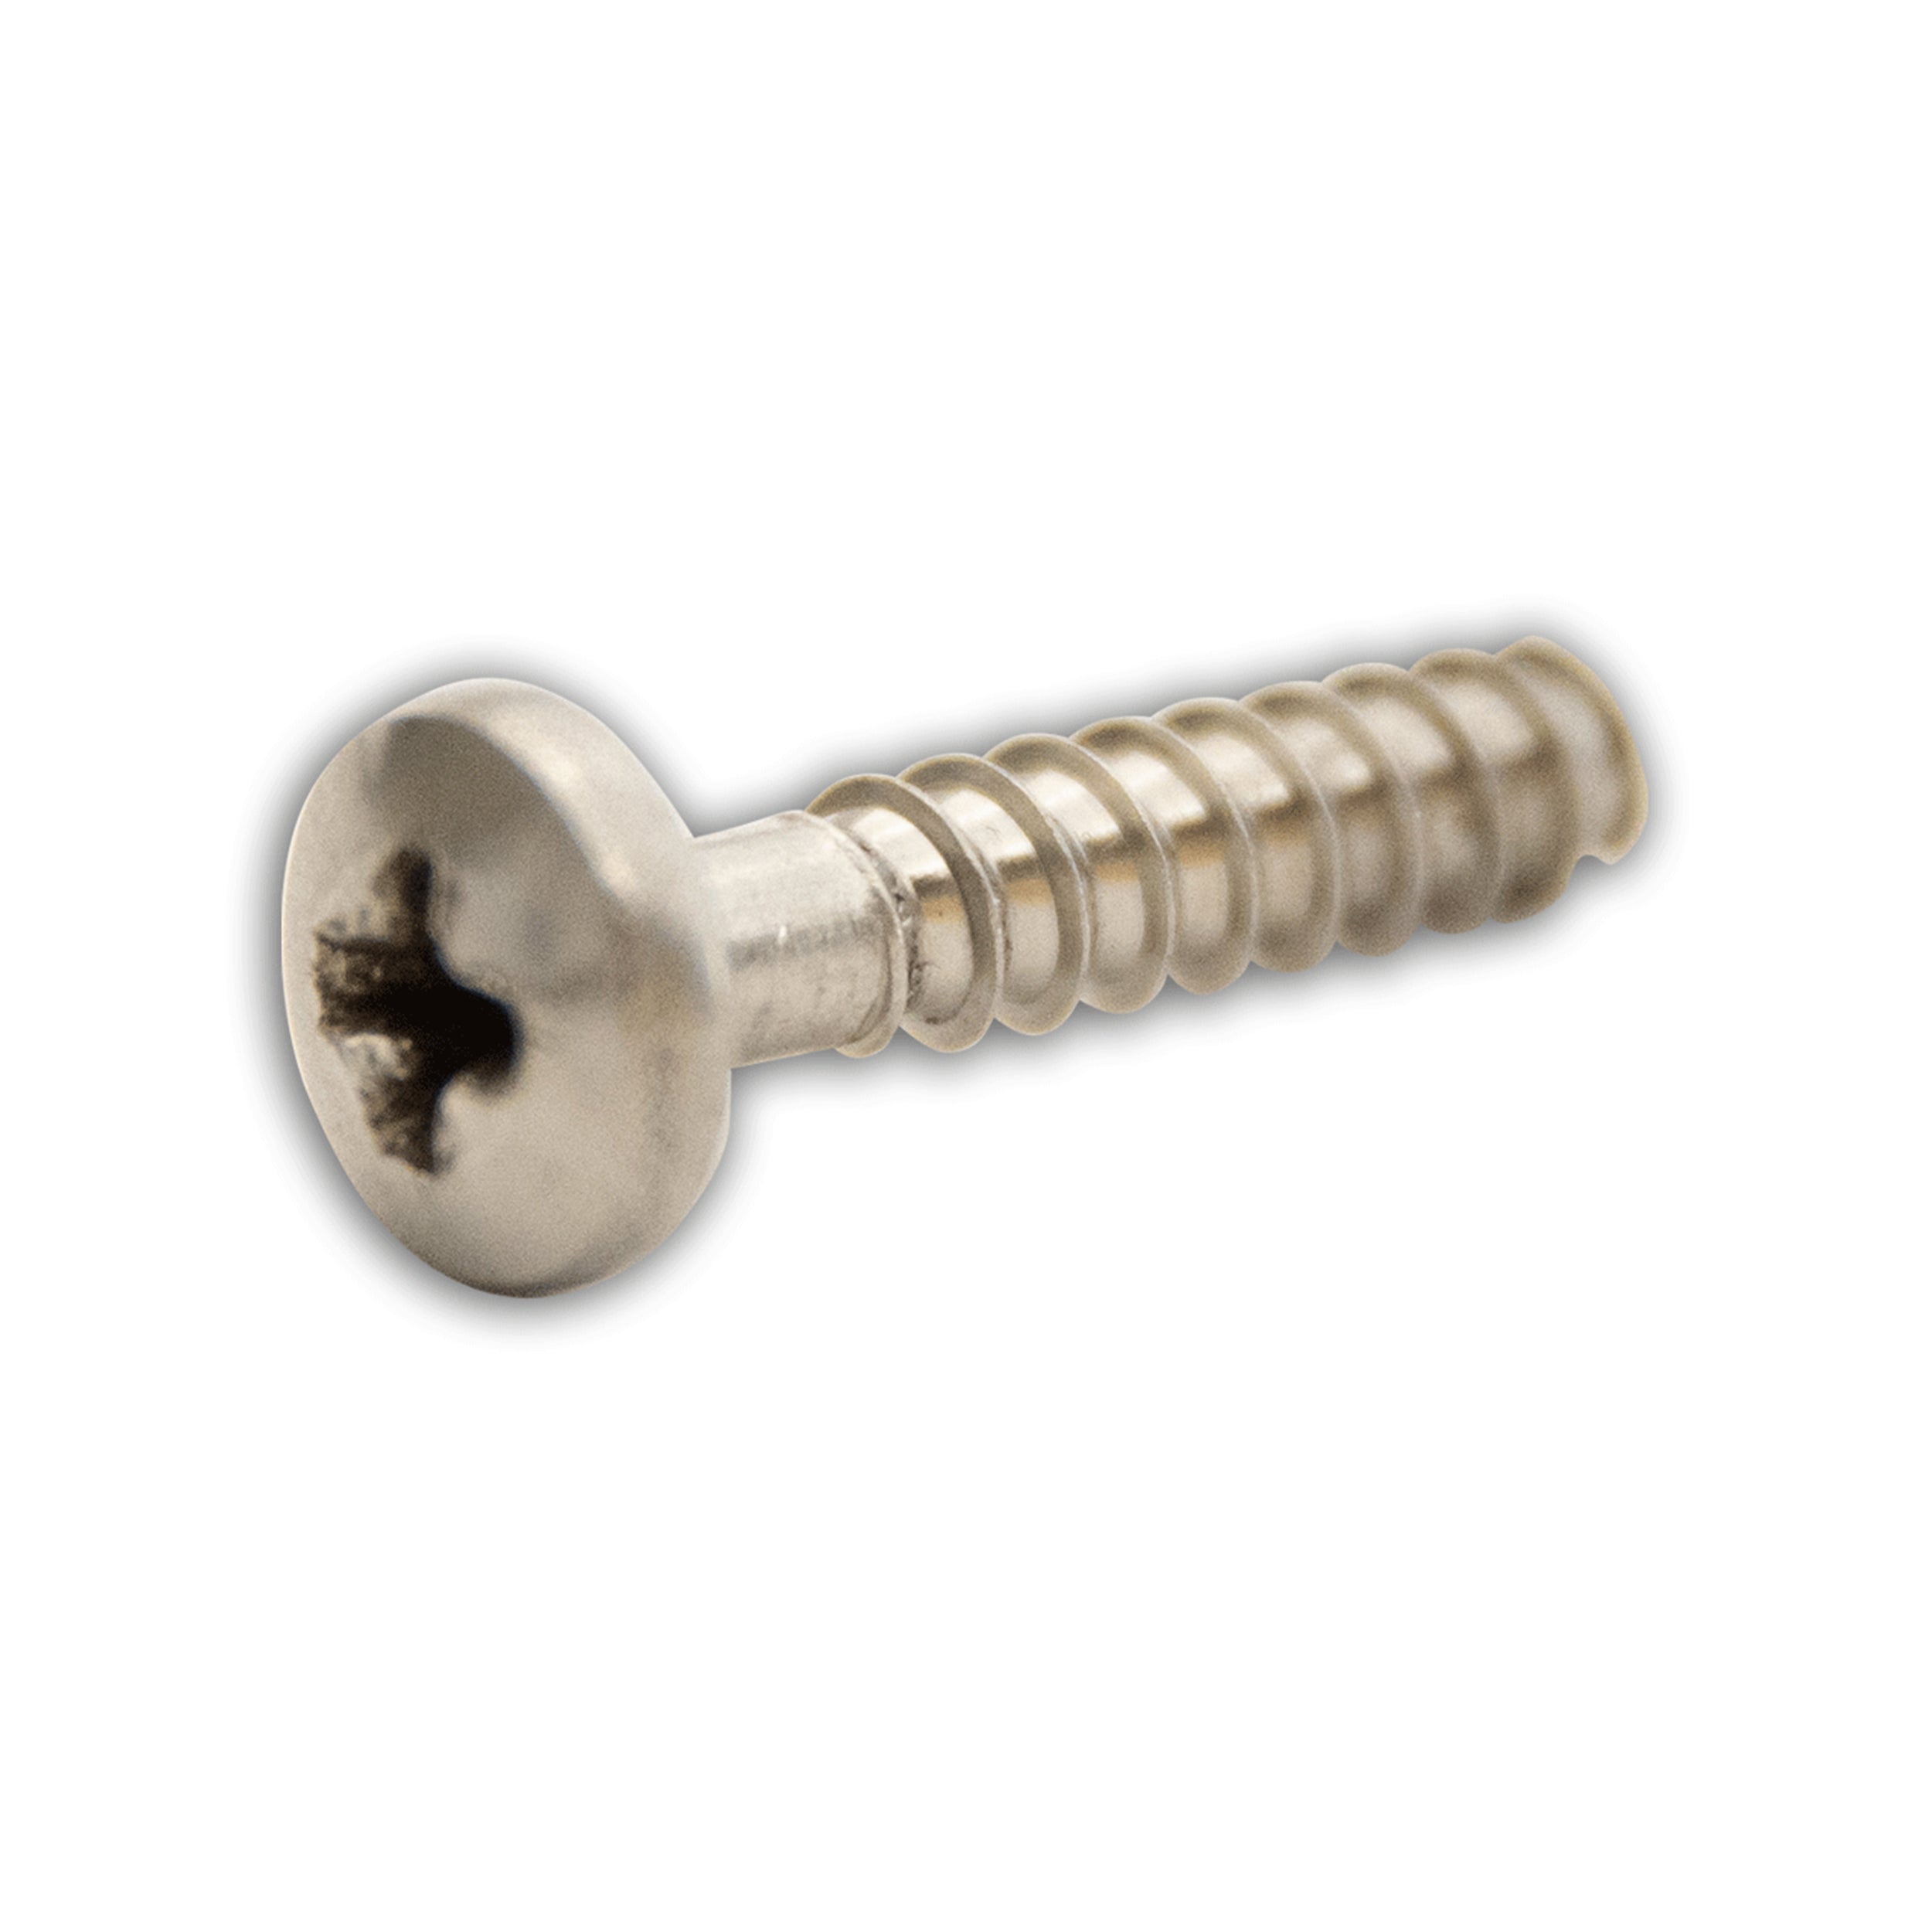 North Free Strap Self-Tapping Screws 6.3x25mm set of 20